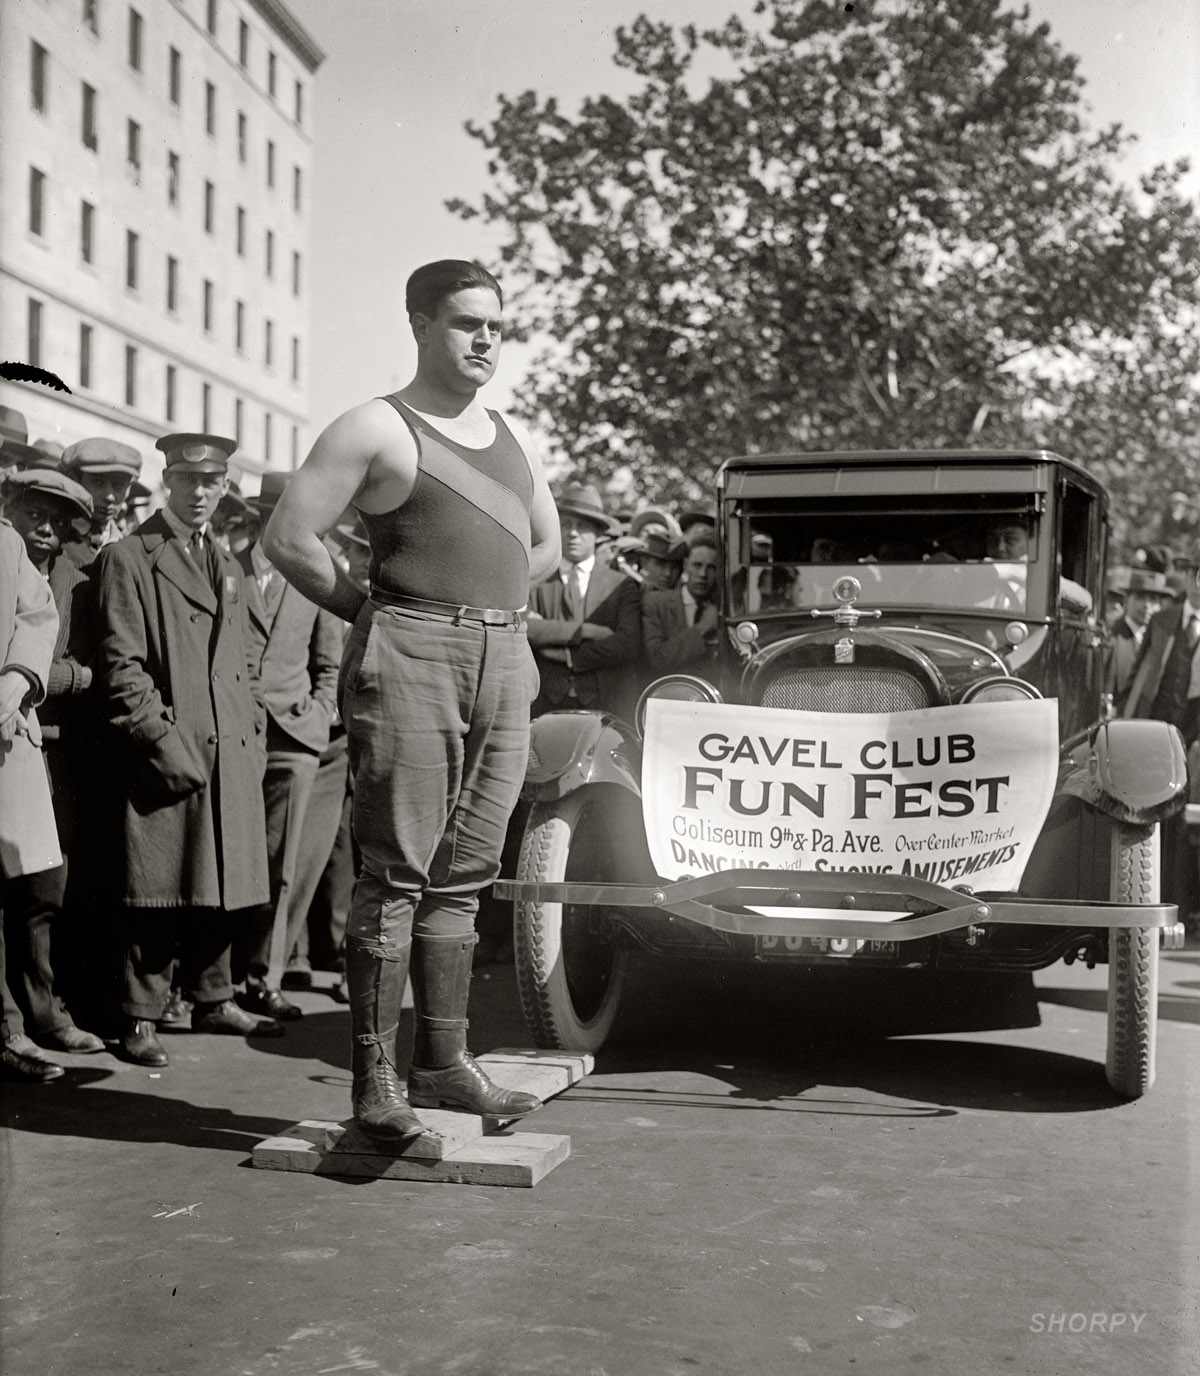 October 5, 1923. Washington, D.C. The war hero and former invalid Galen Gough, known as the "Miracle Strong Man" after recovering from having his head caved in by bomb shrapnel in France. National Photo Co. glass negative. View full size.